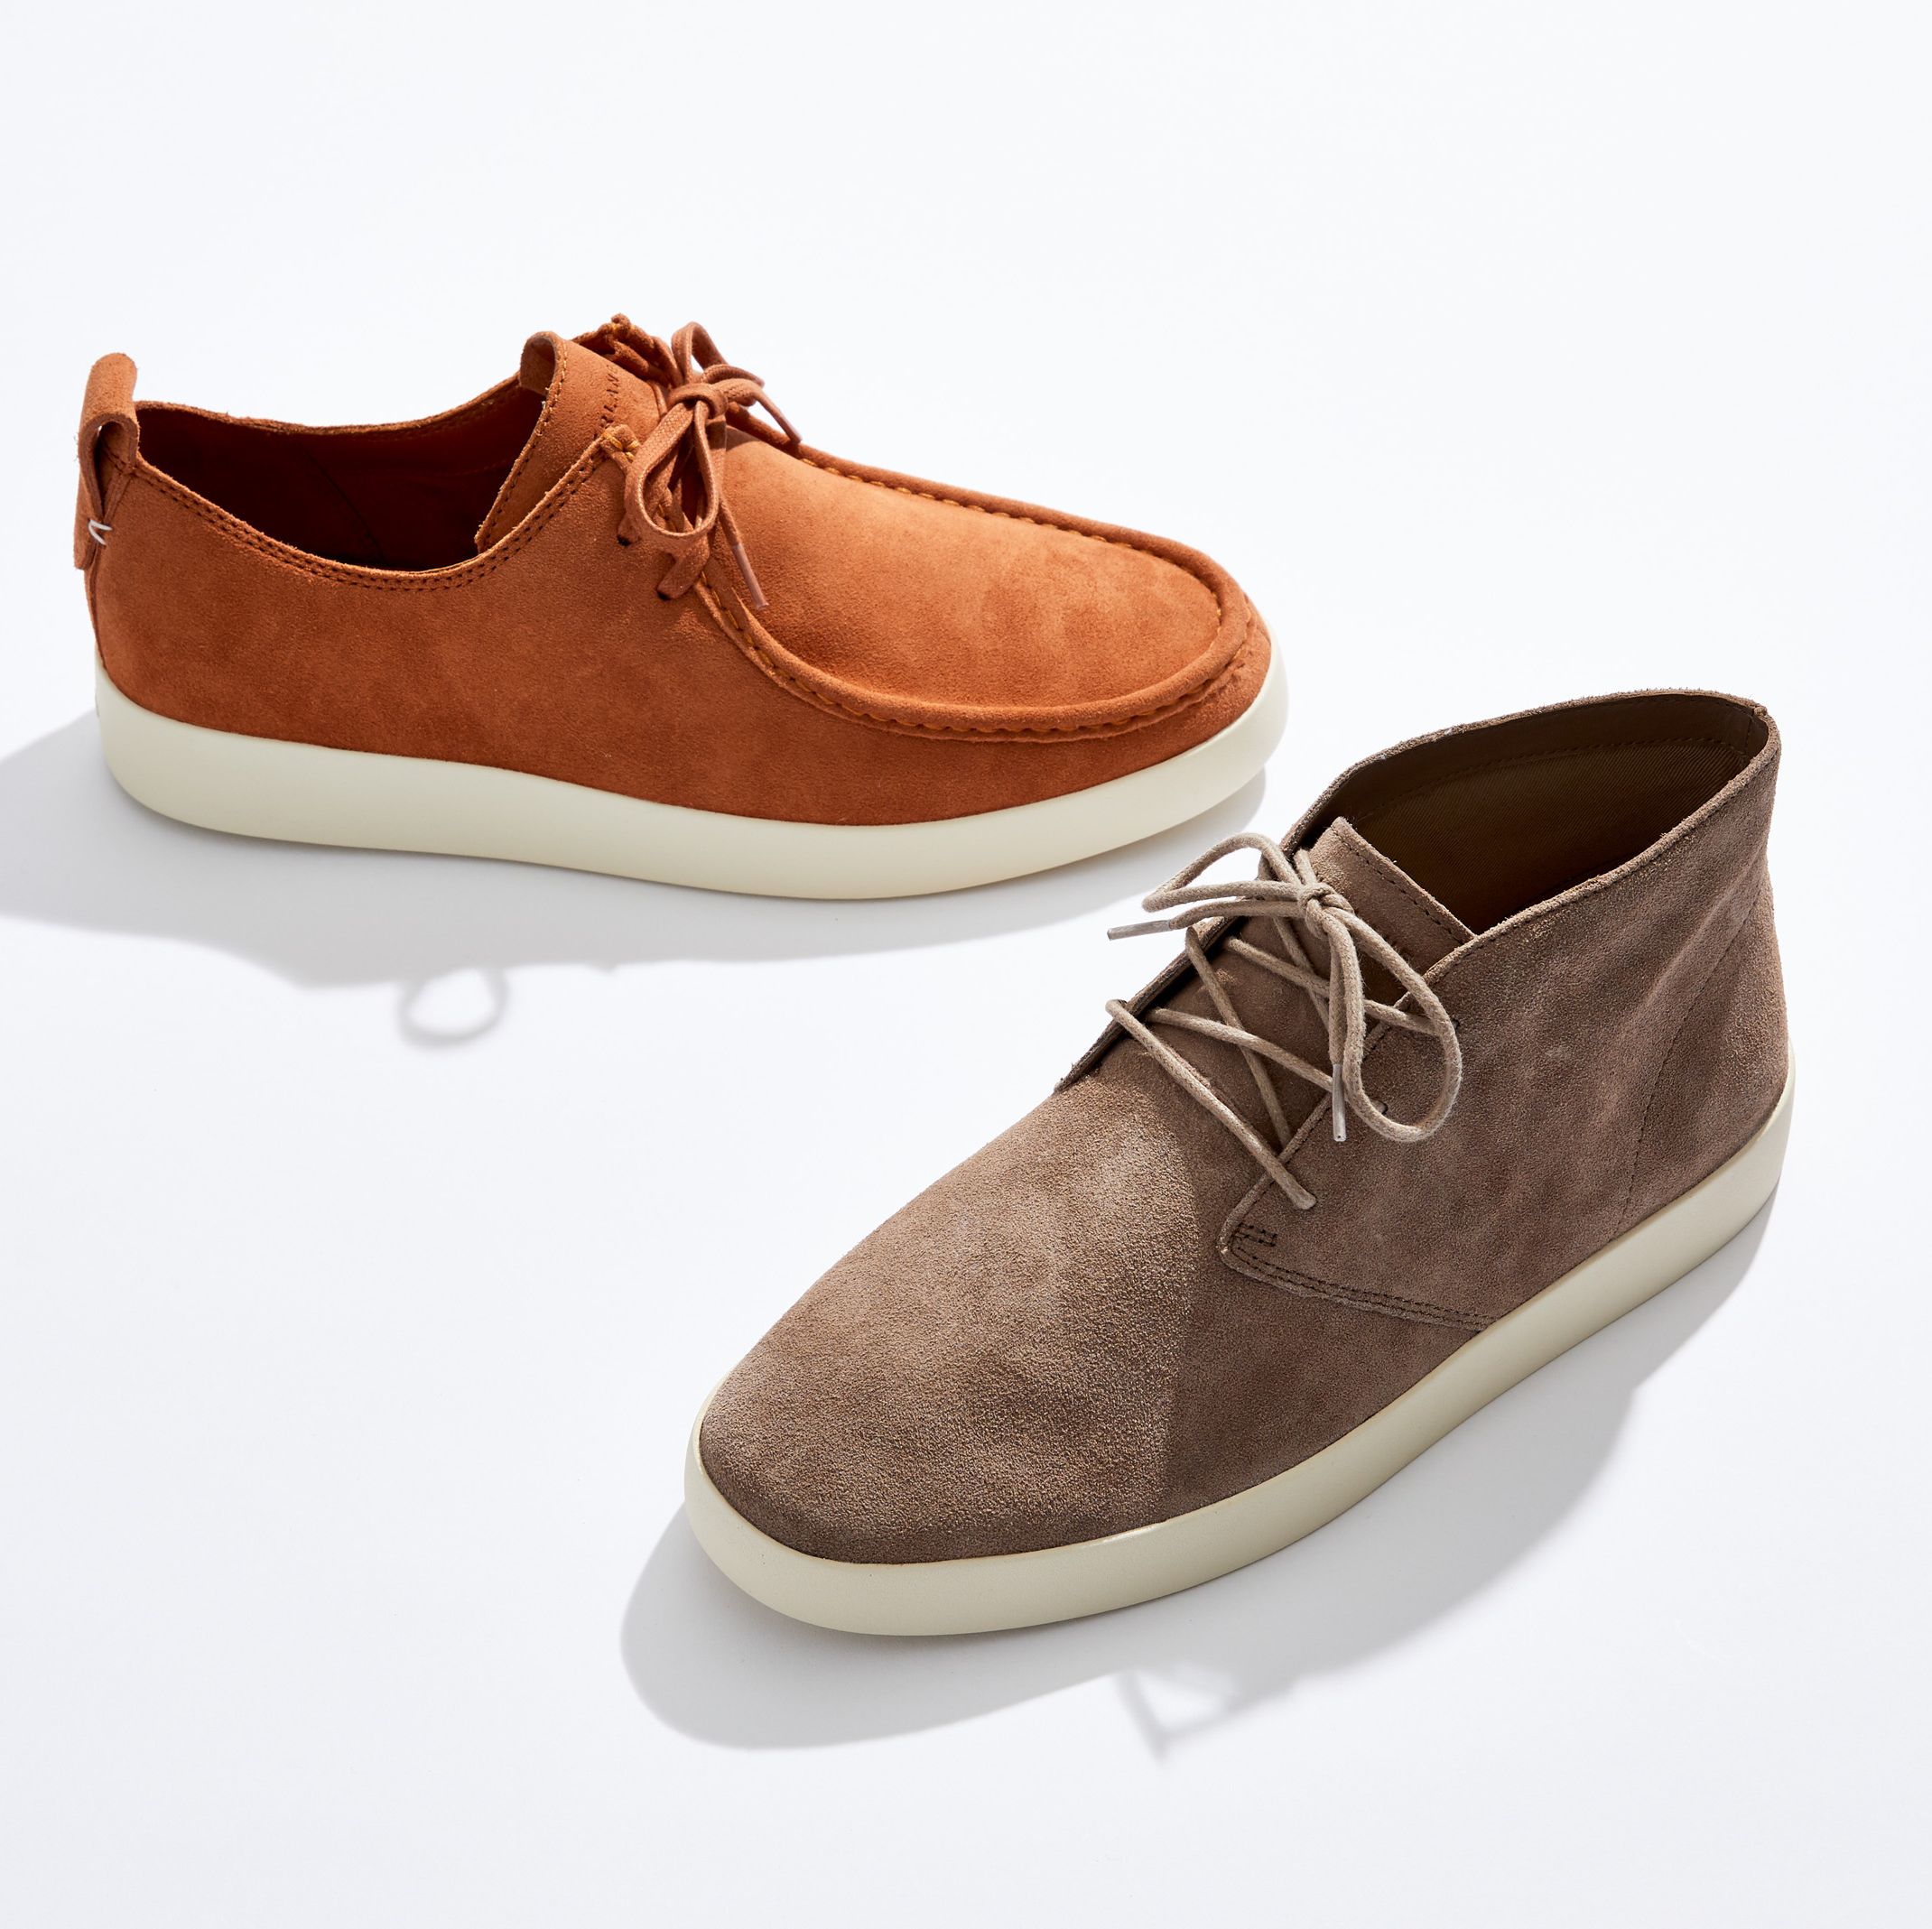 Everlane Finally Released Shoes for Guys, and They Hit Just Right